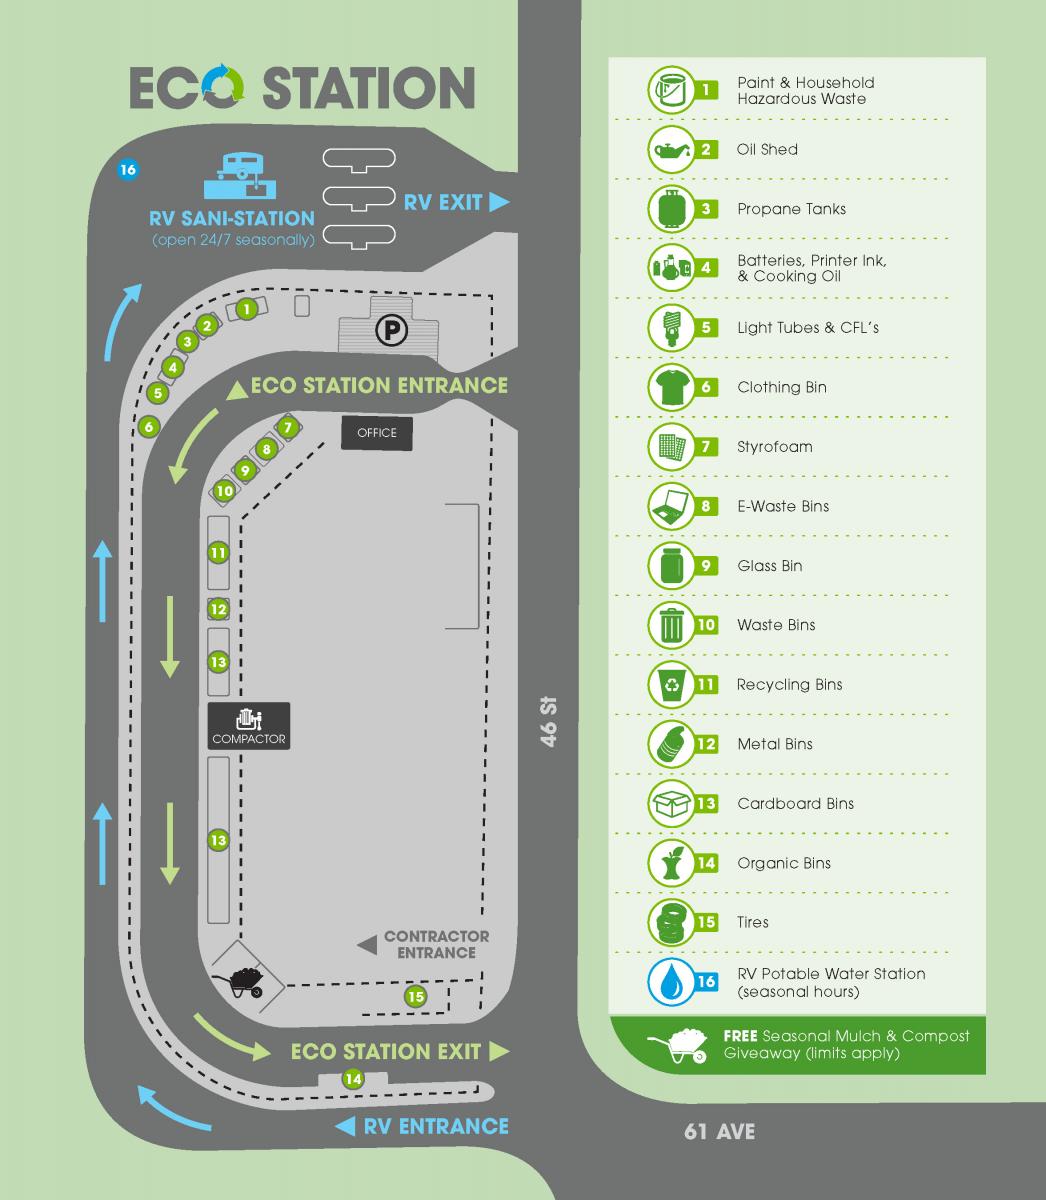 eco station map - updated 2021.jpg